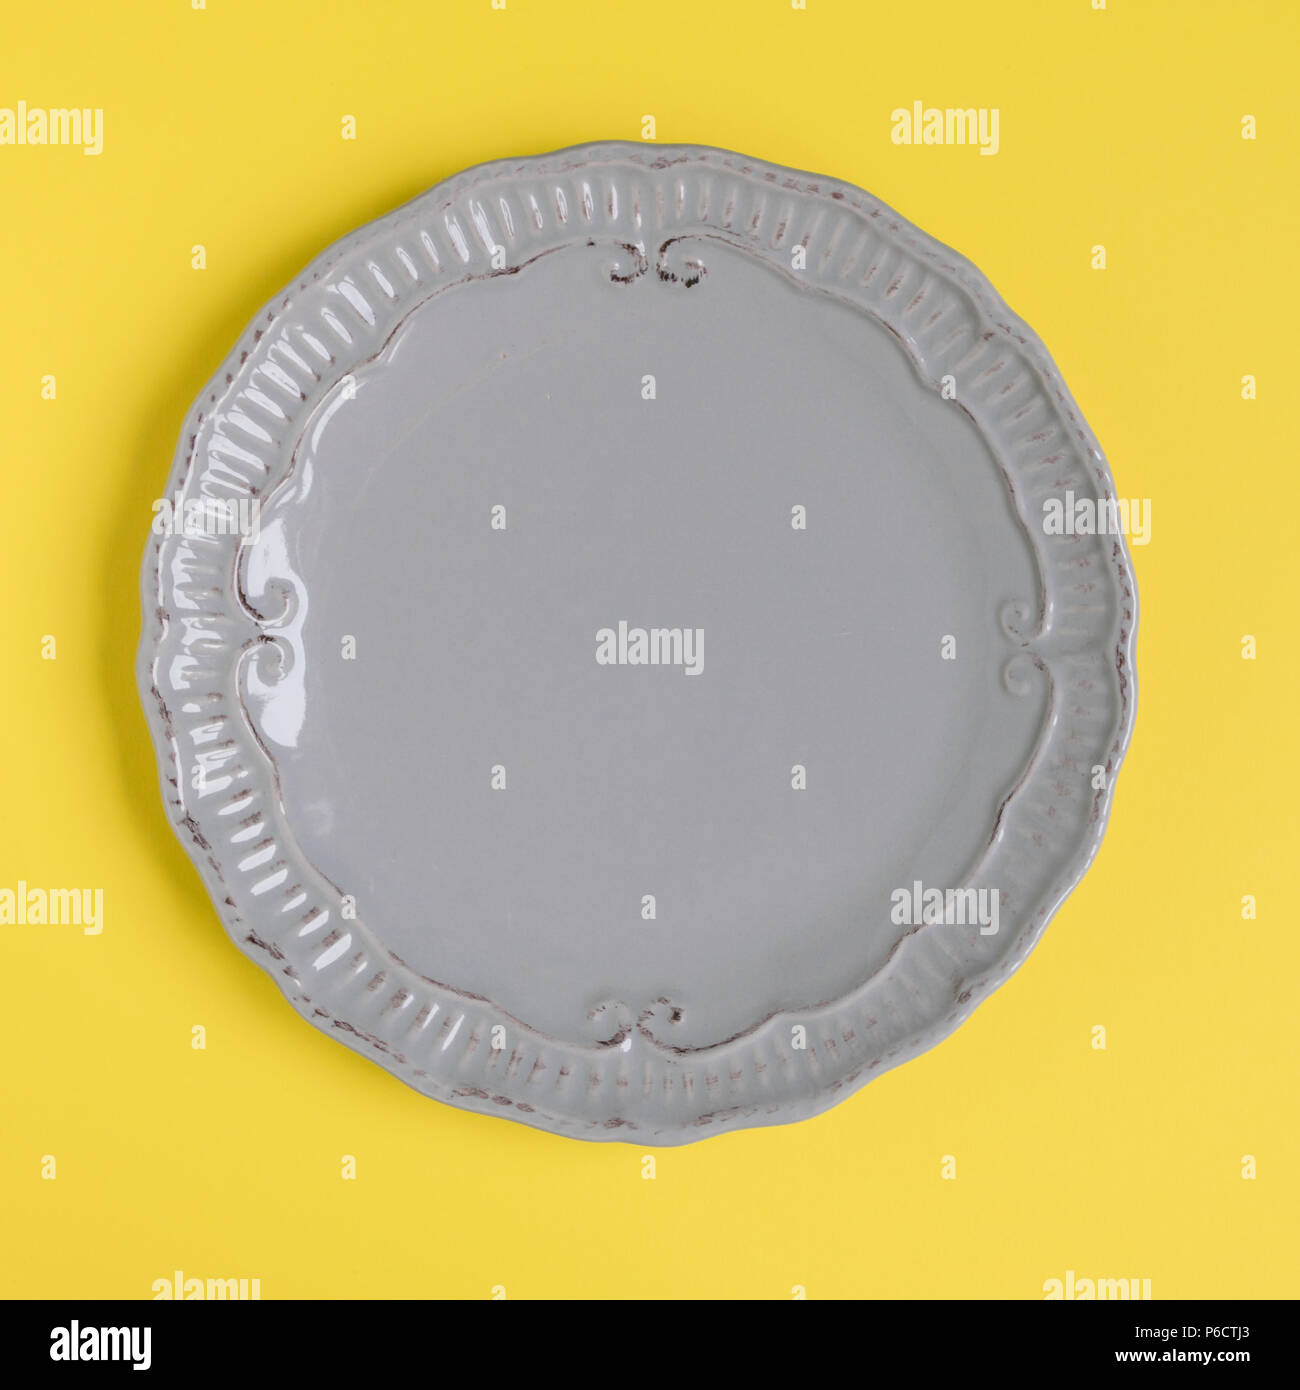 Grey rustic plate on yellow background. Square image. Top view. Stock Photo